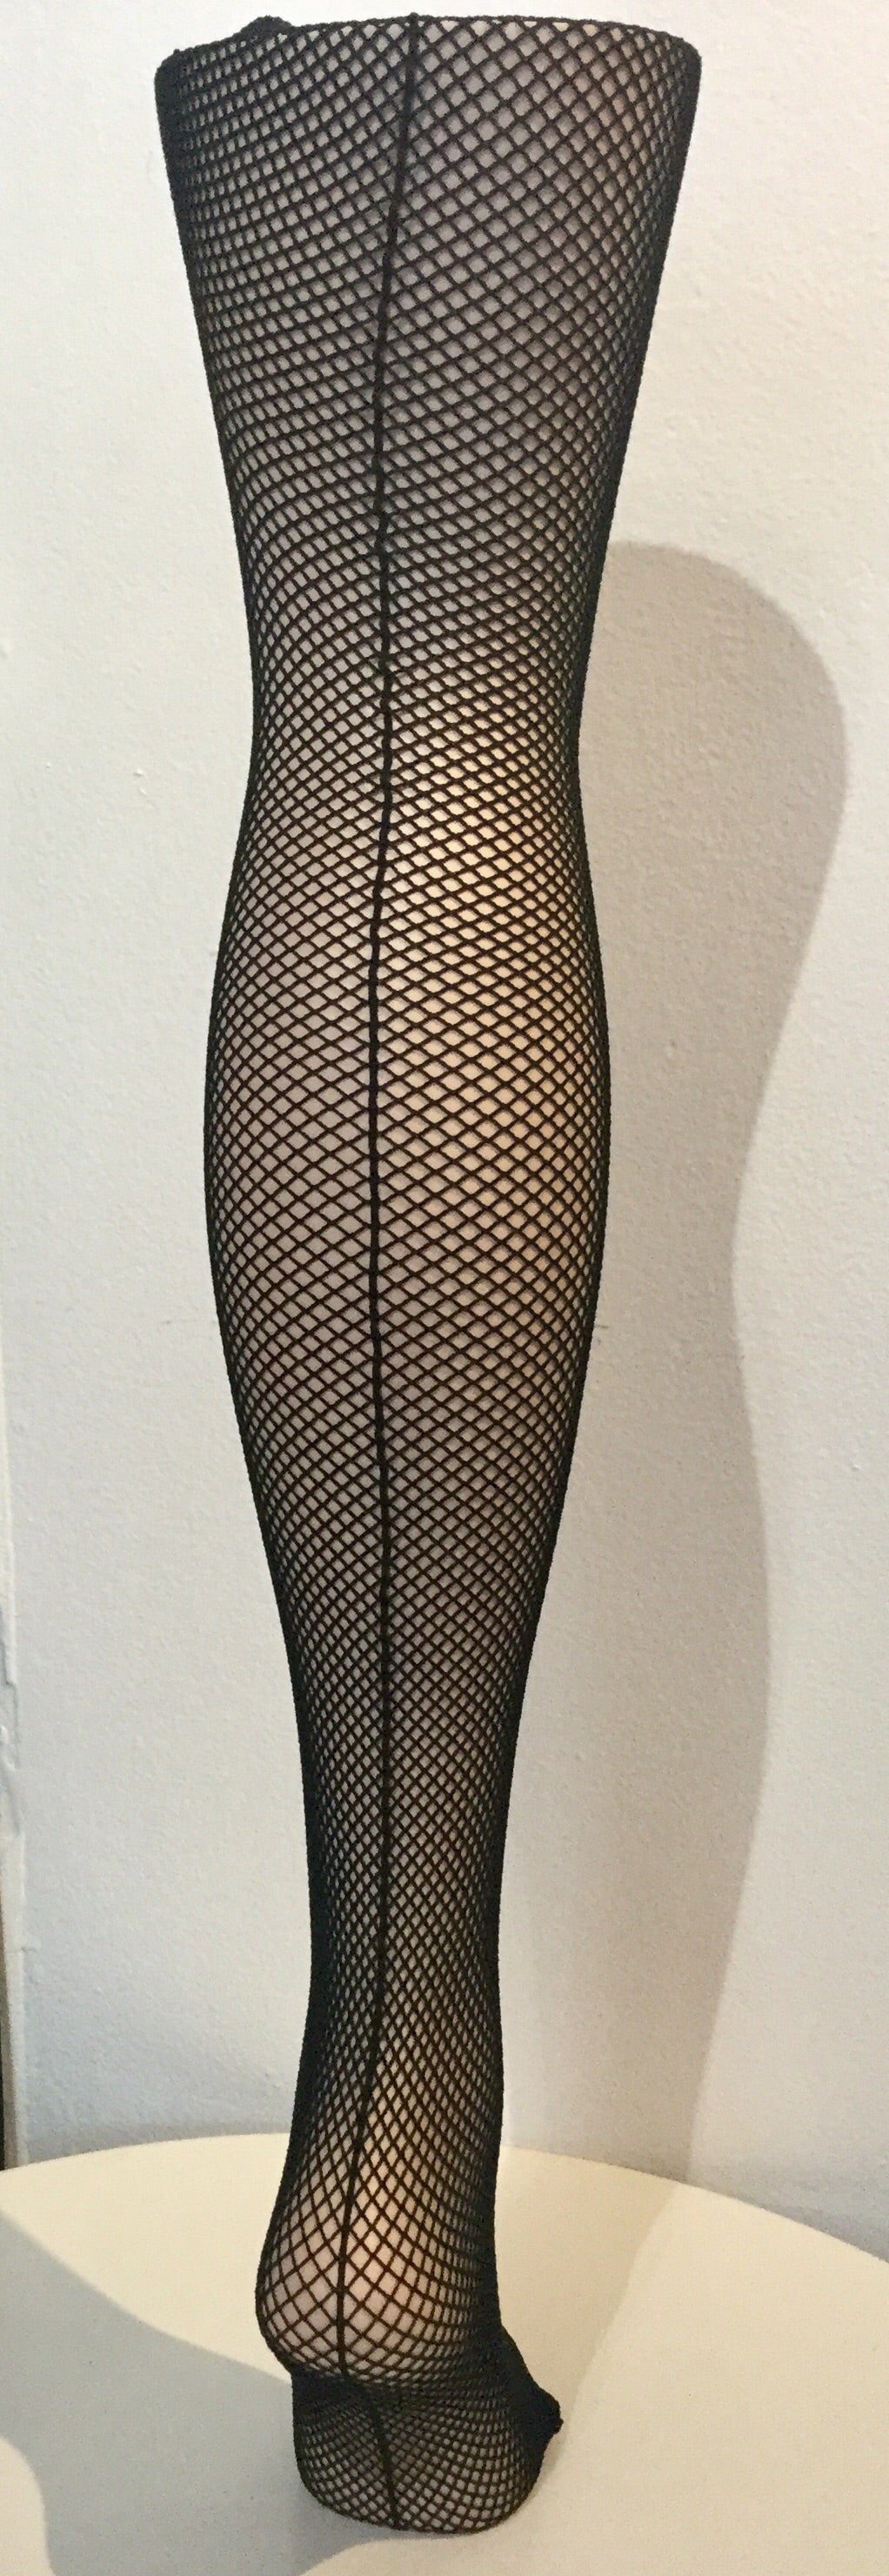 Tied And Tempting Fishnet Body Stocking - Burju Shoes